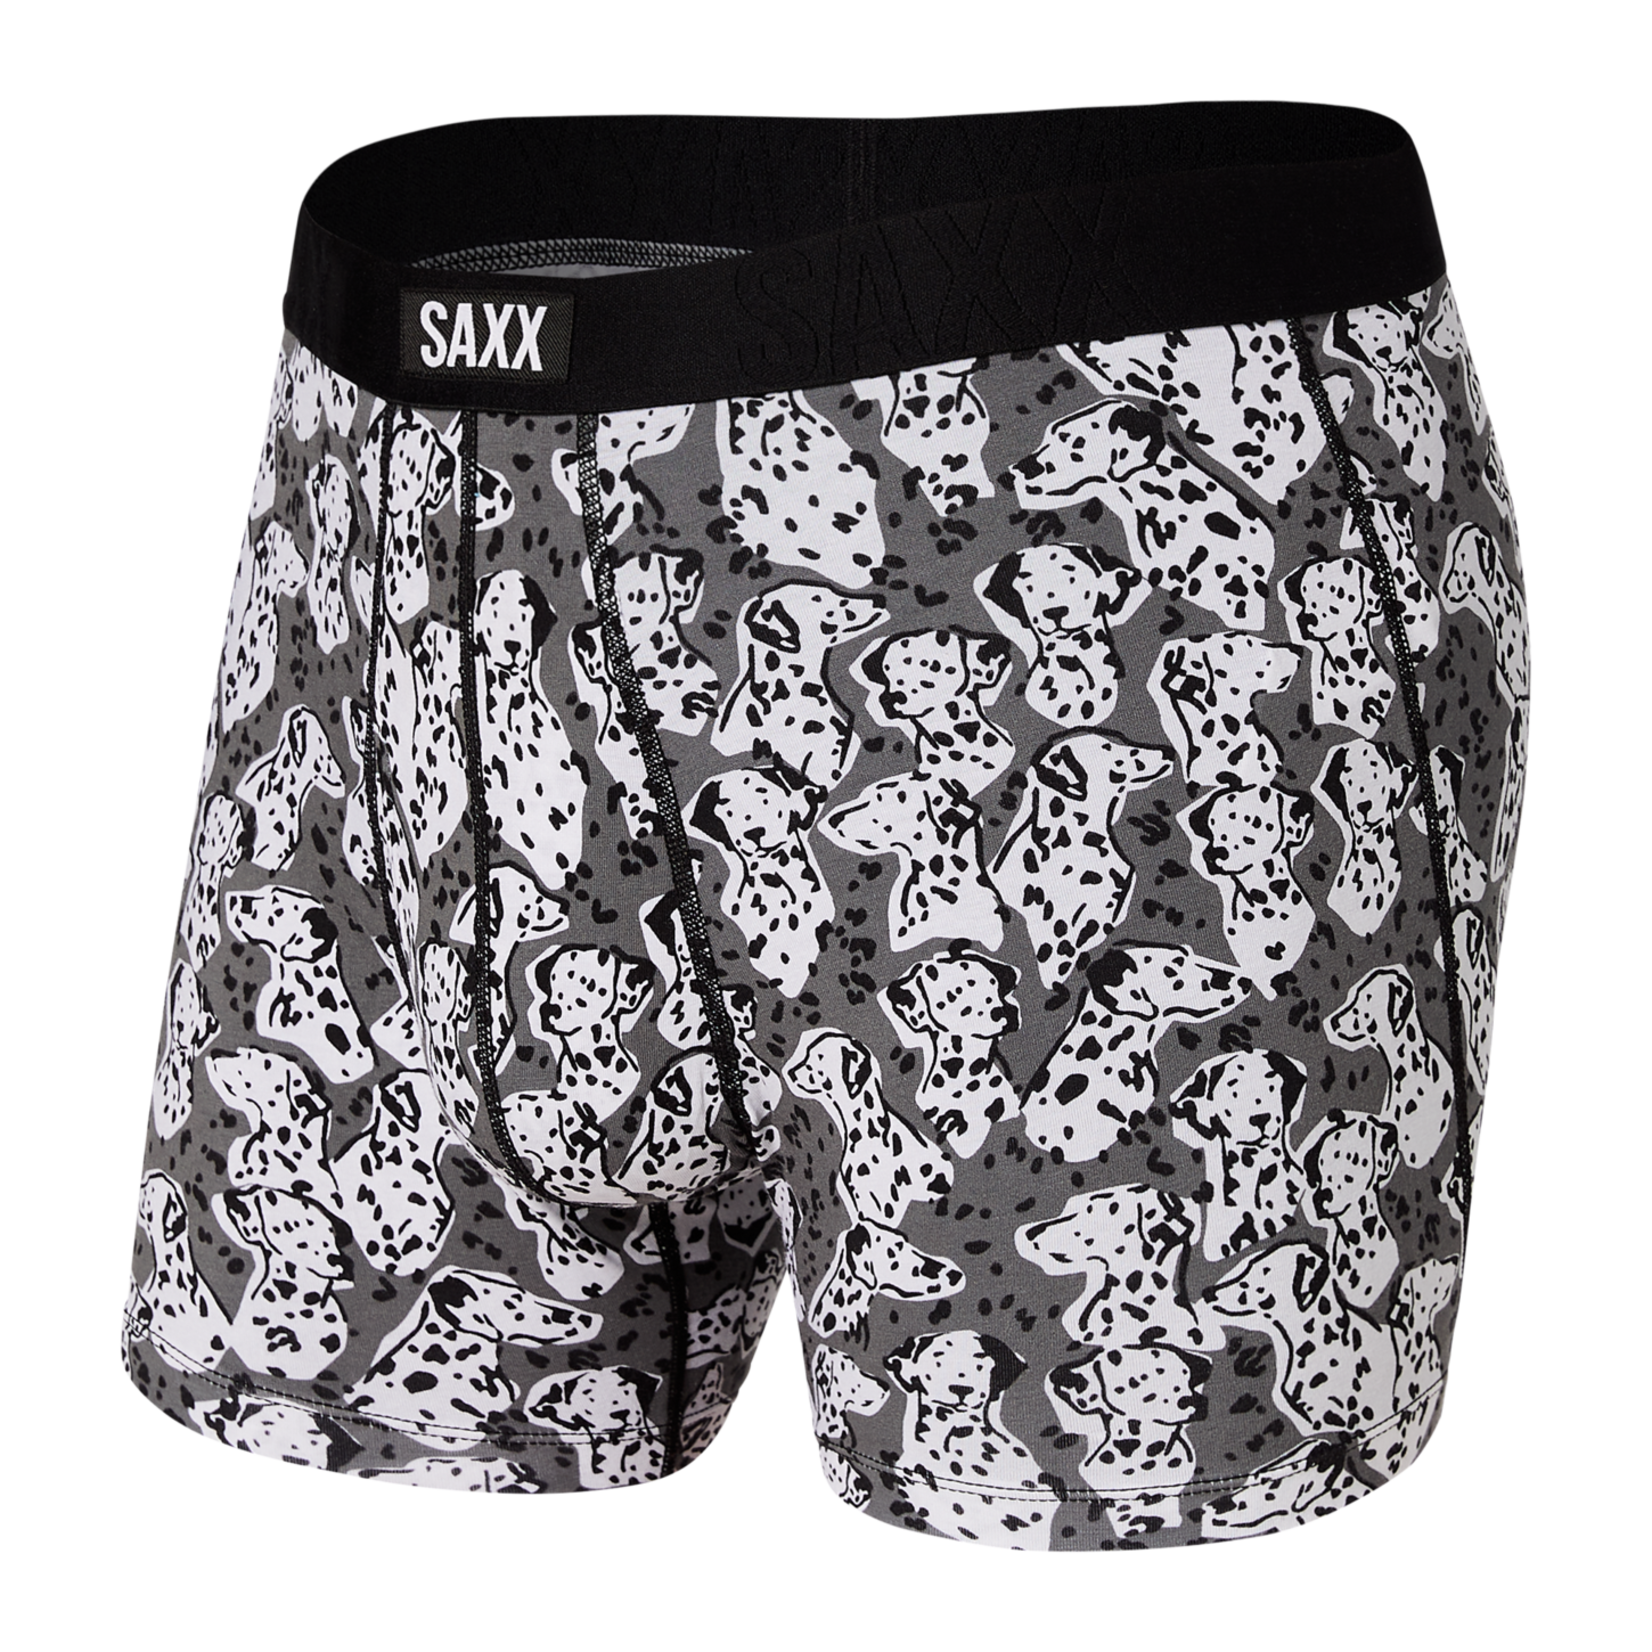 SAXX Undercover Boxer Brief Charcoal Dog Days